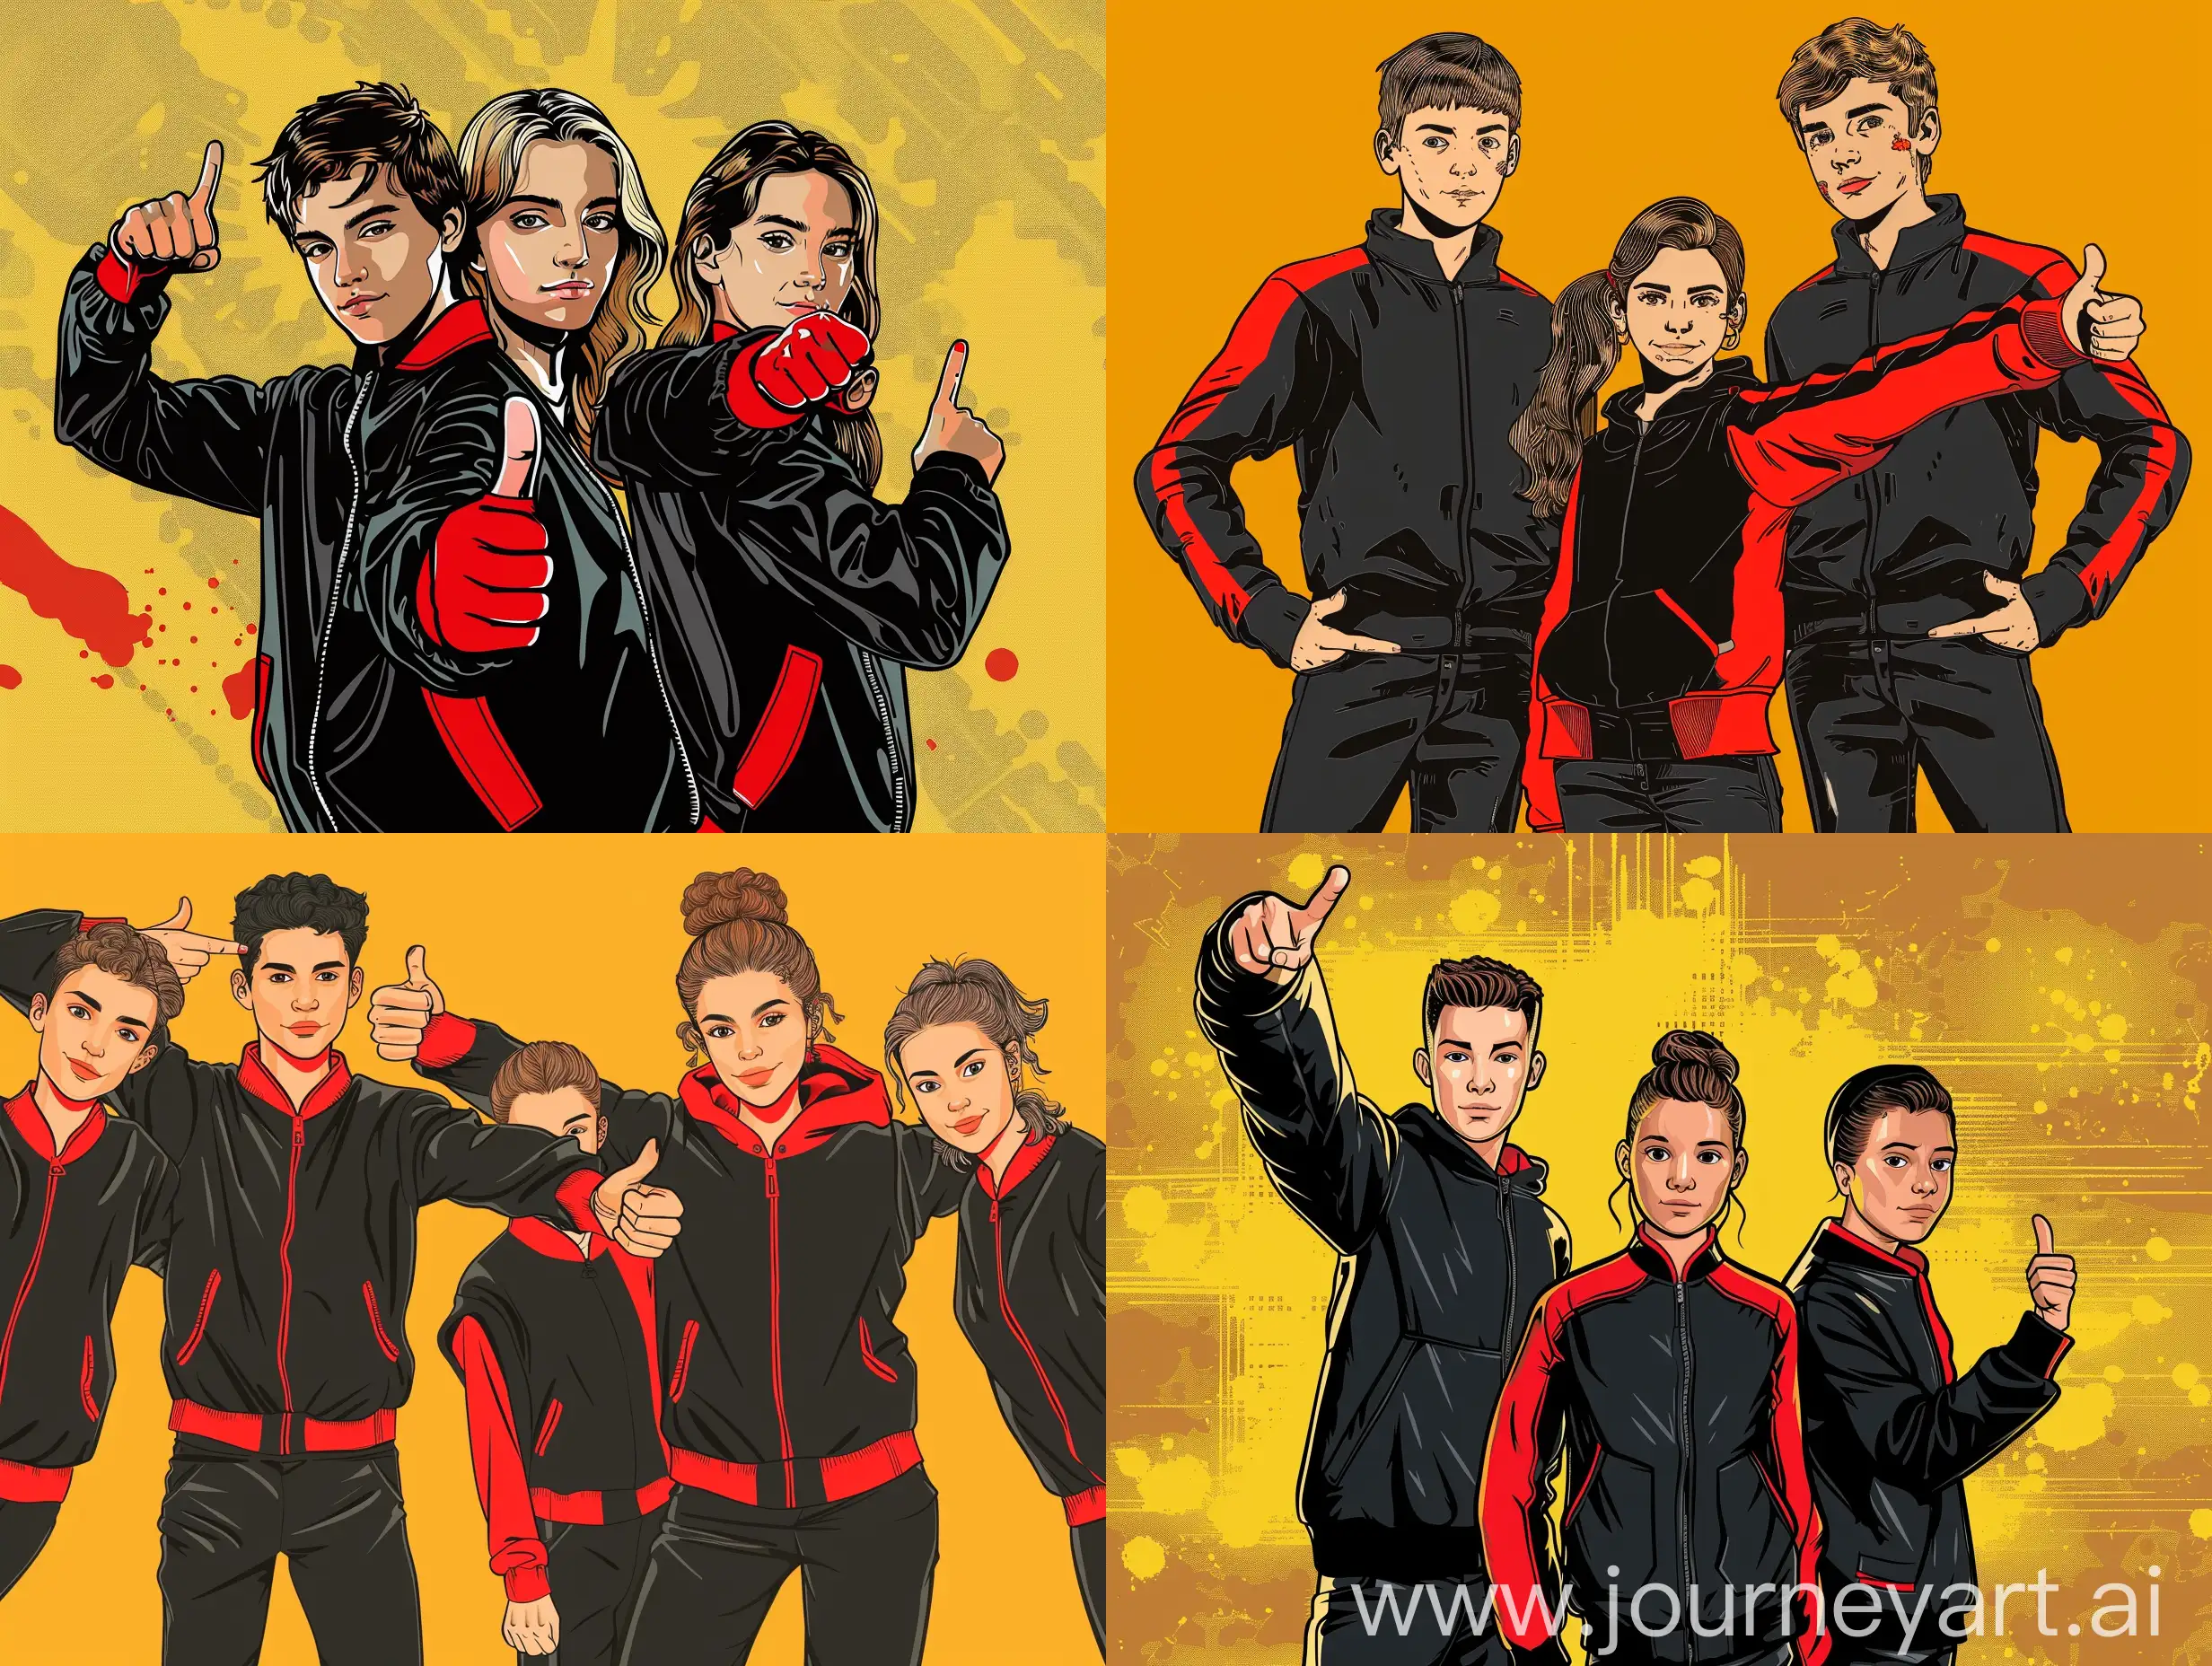 Young people, two tall boys of twenty years old and two girls in the center, in black bombers with red sleeves, stretch their hand forward with their thumb raised, pop art style